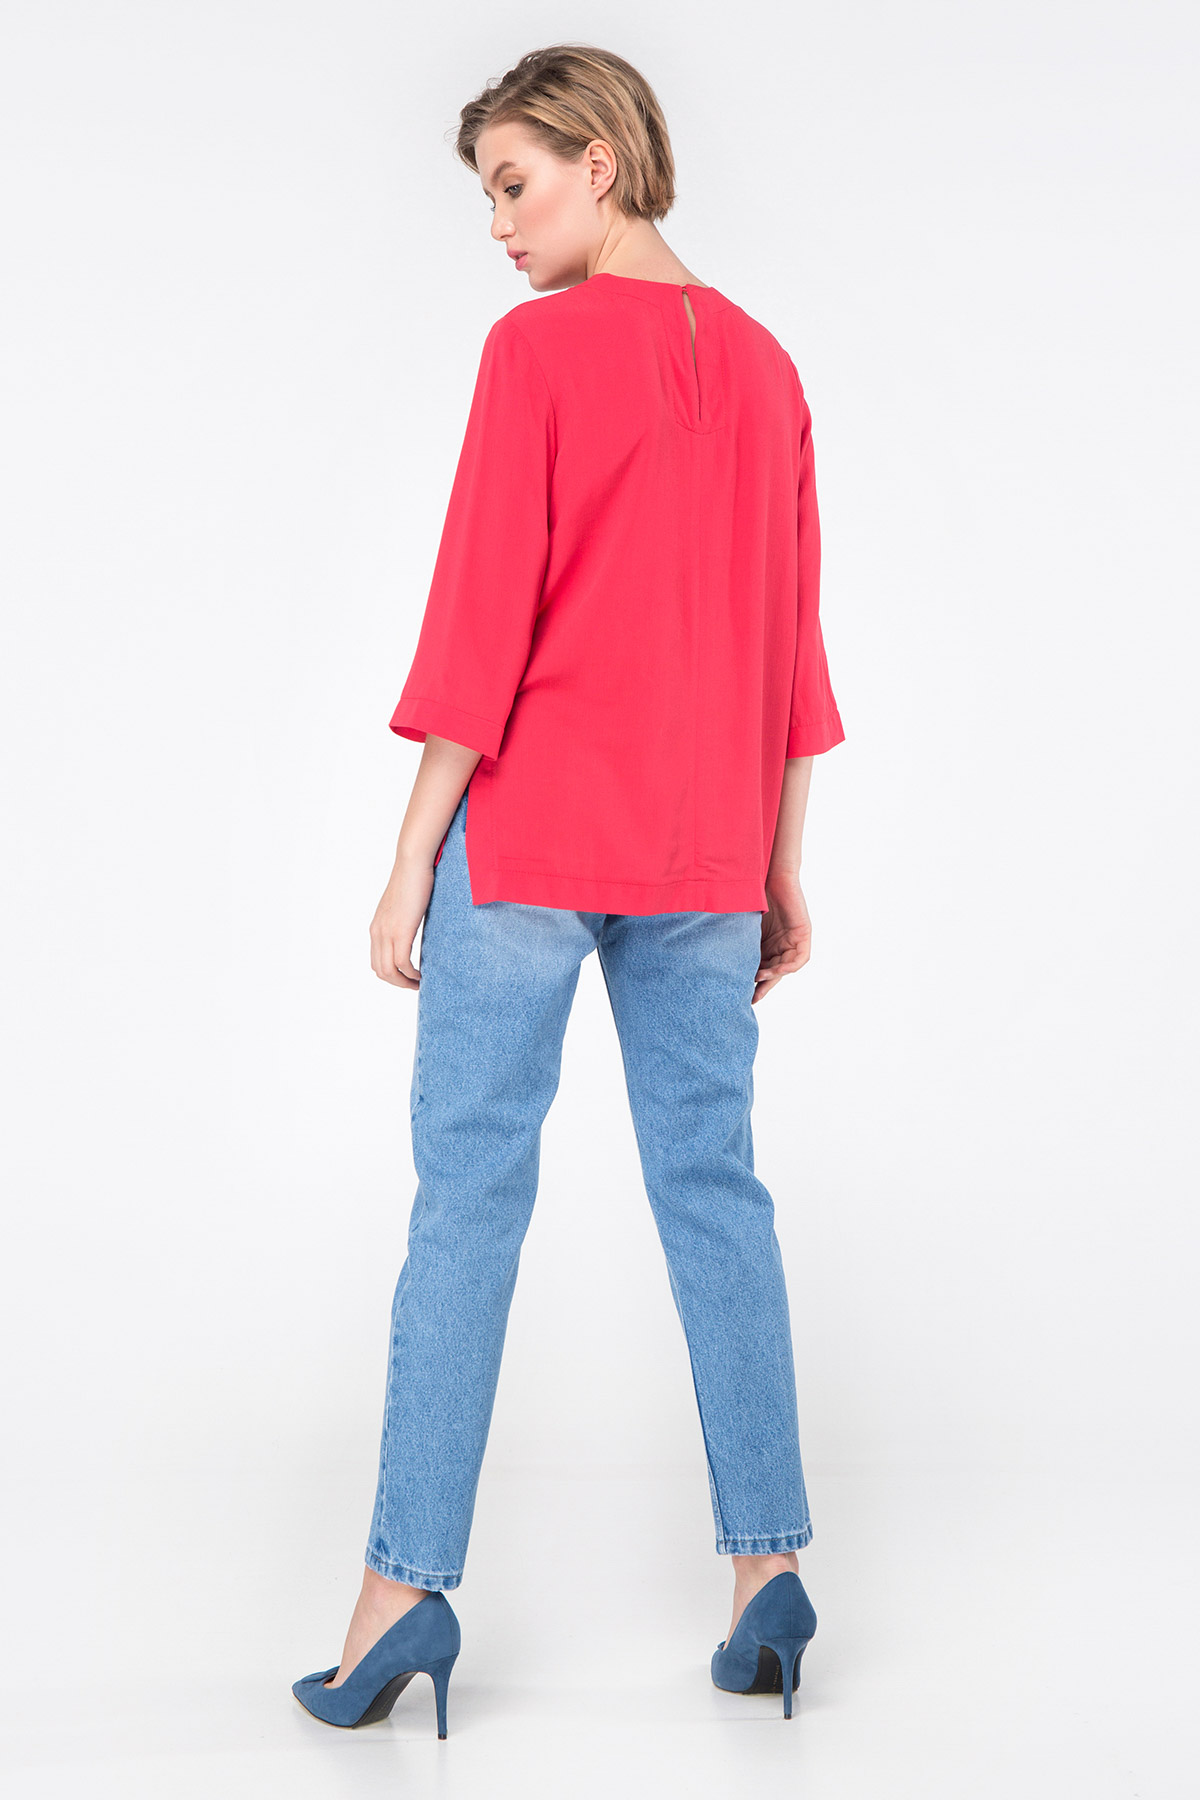 Free red top, photo 4